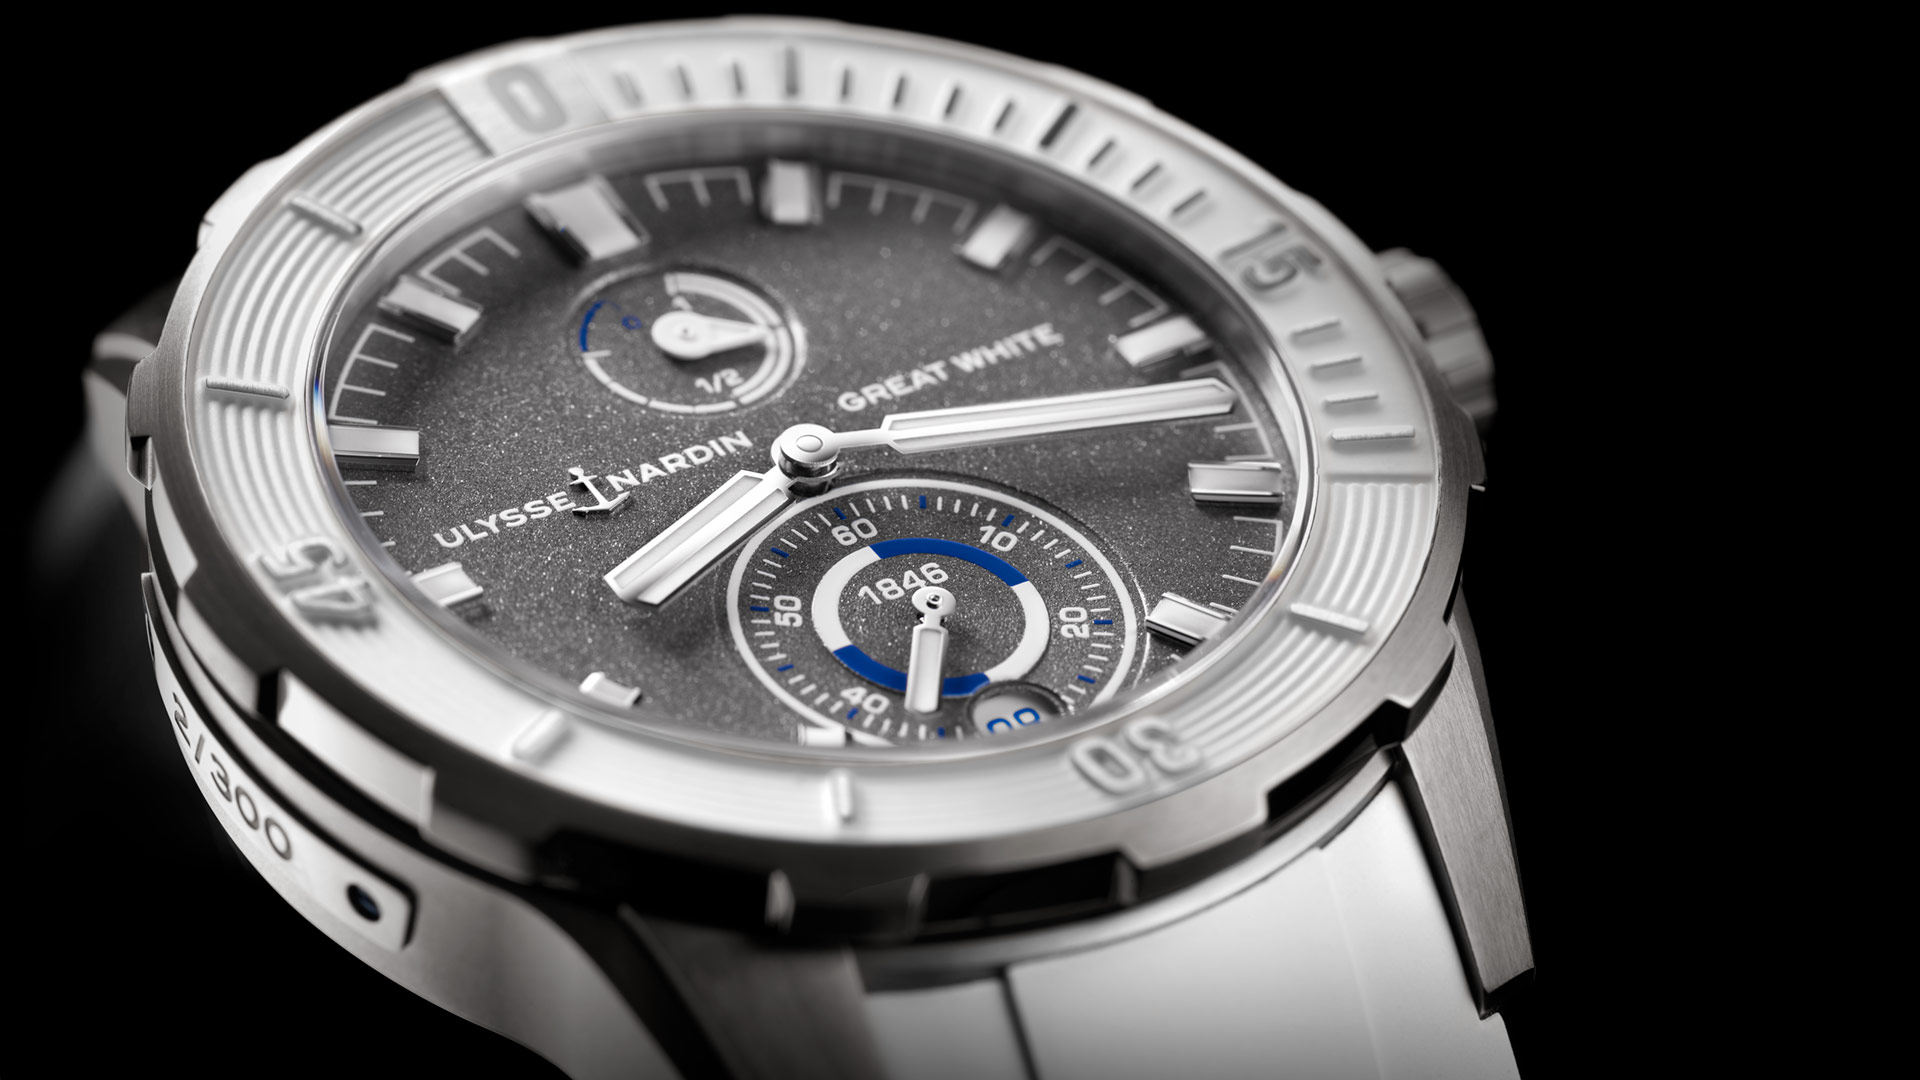 New Ulysse Nardin Diver Chronometer Watches For 2018